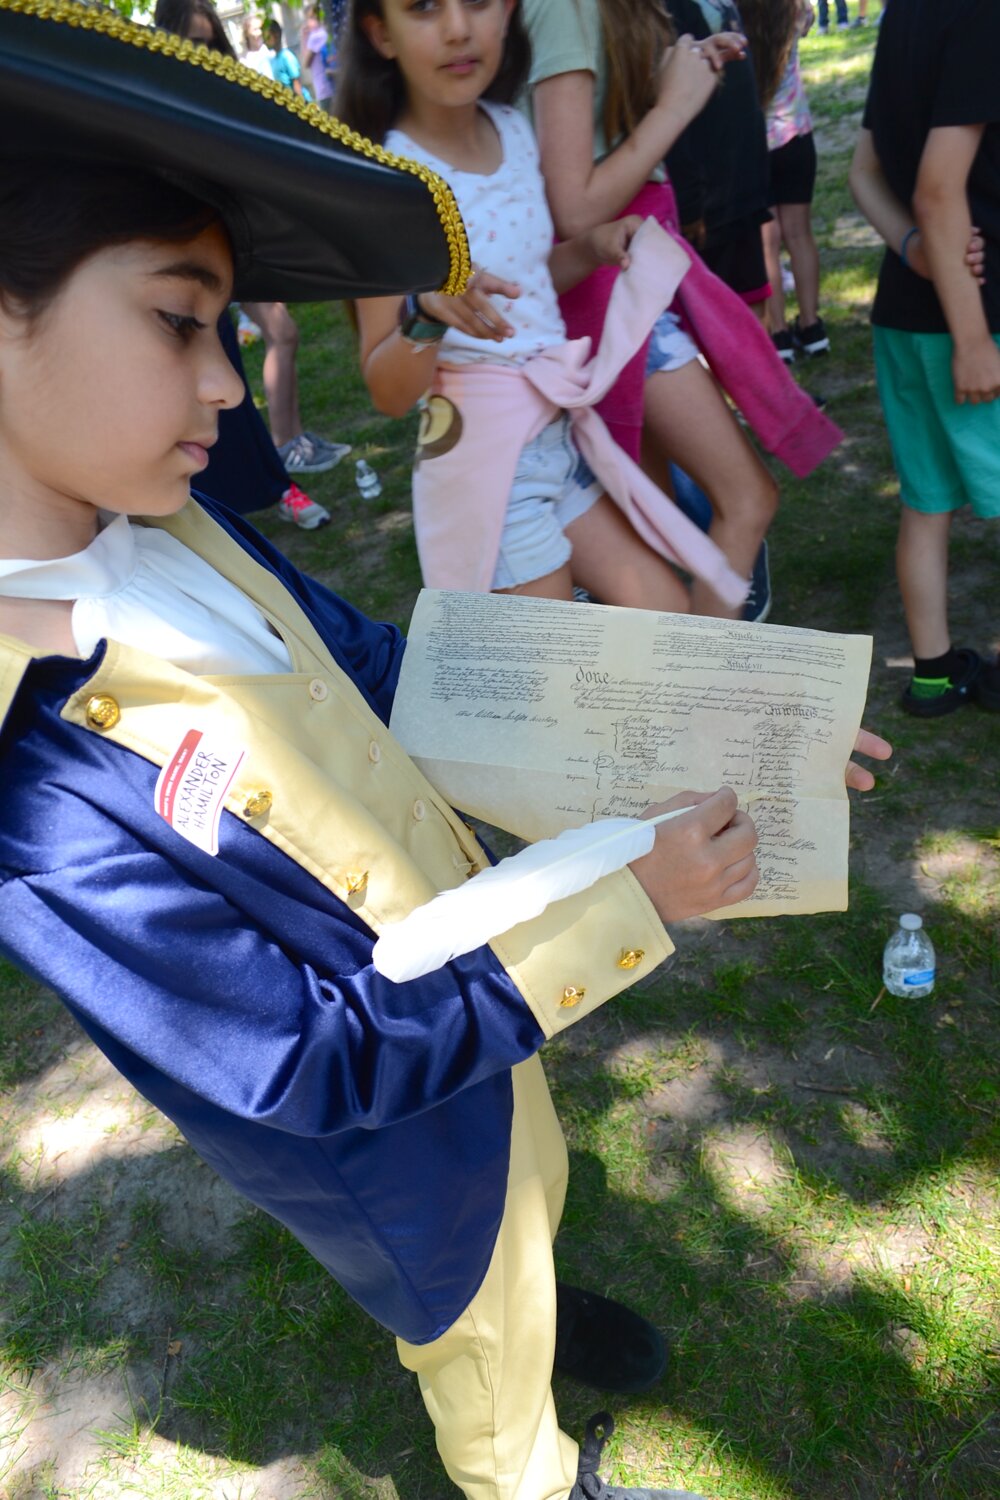 Stella Viswanath points to where her historical figure, Alexander Hamilton, signed his name on the Declaration of Independence. She said she had seen the ‘Hamilton’ musical at least four times, and had memorized some of the songs.